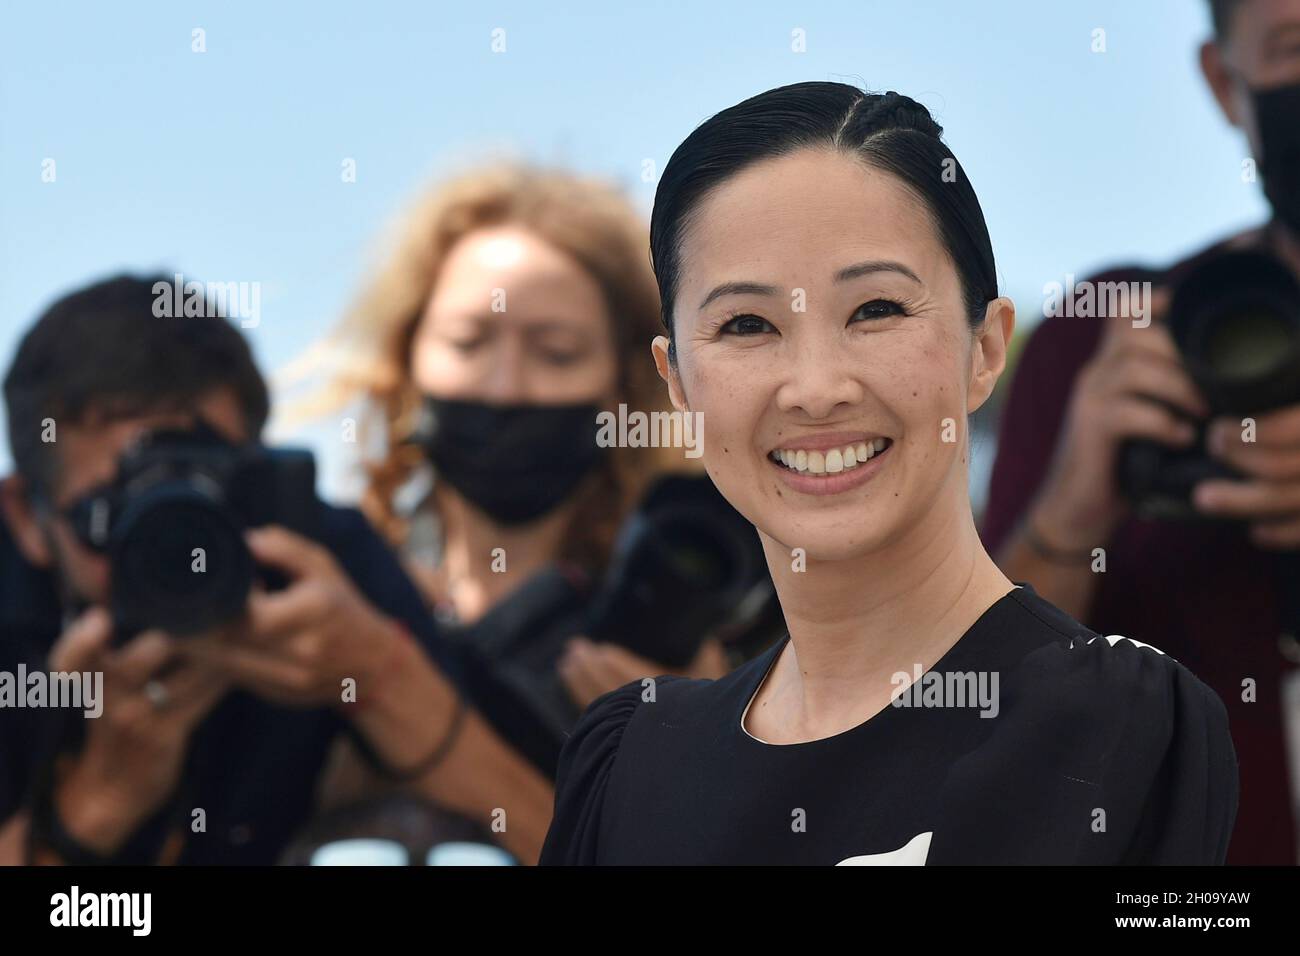 74th edition of the Cannes Film Festival: actress Linh Dan Pham posing during a photocall for the film “Blue Bayou”, directed by Justin Chon, on July Stock Photo